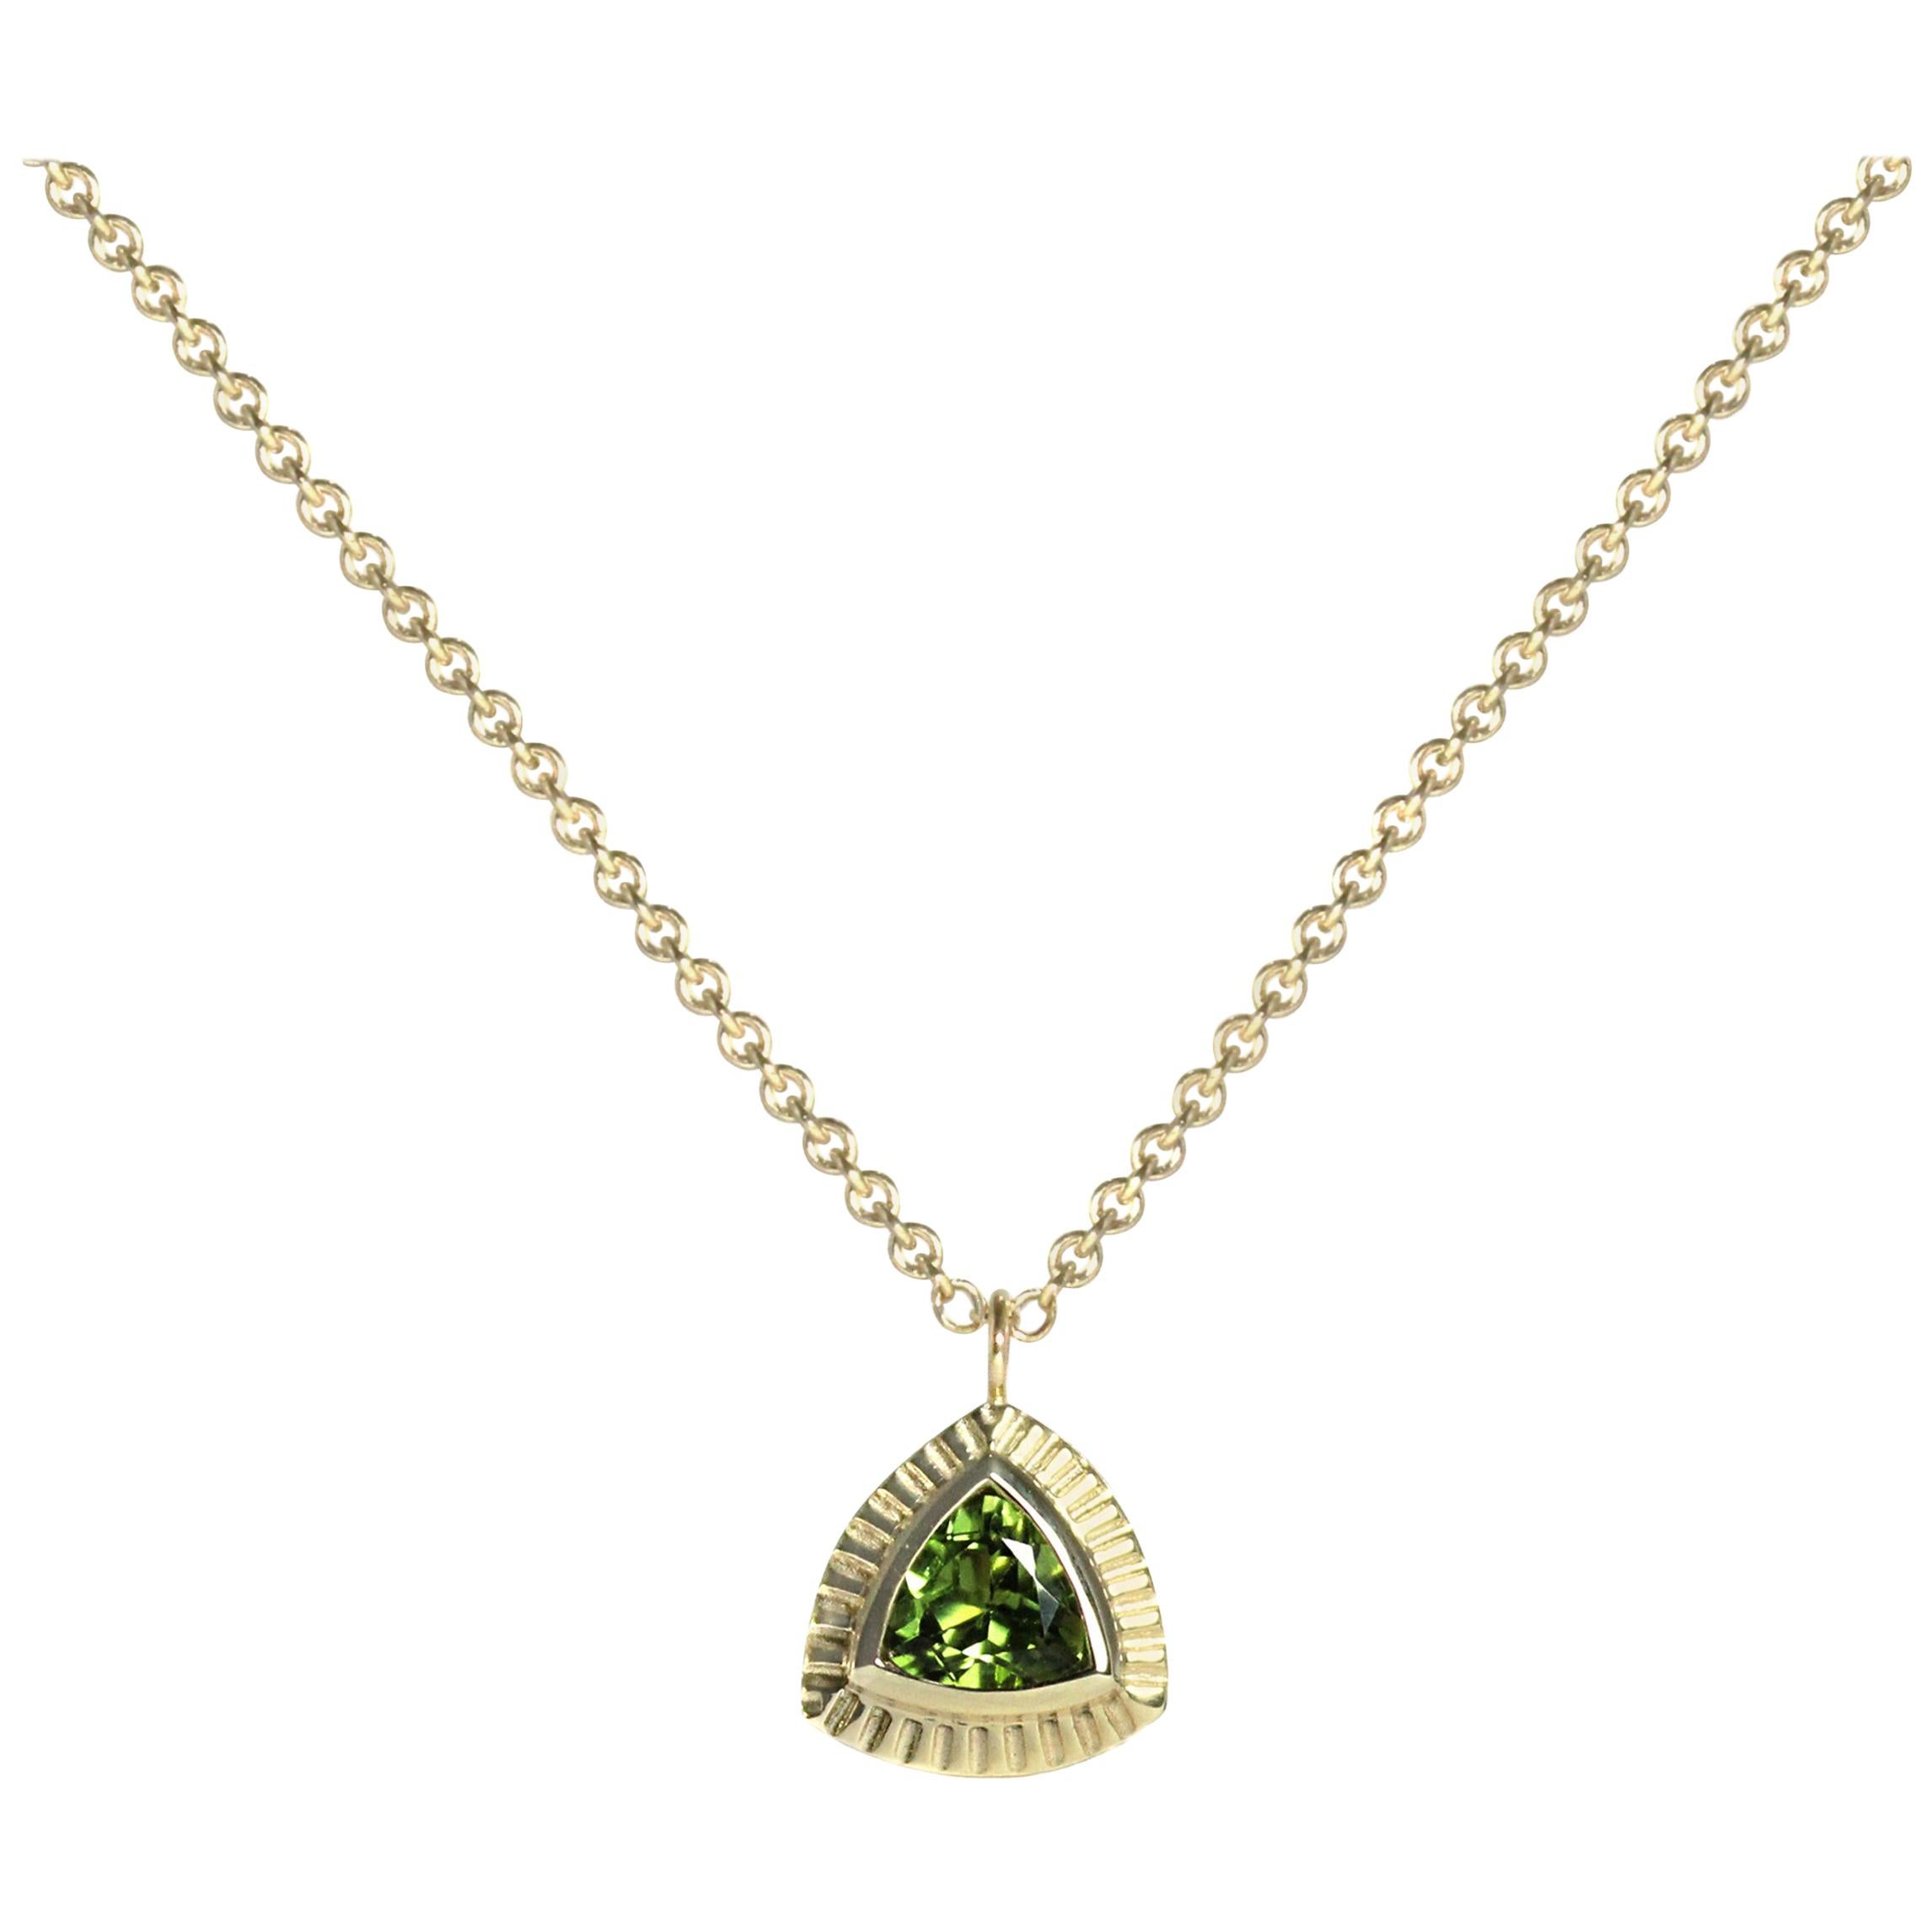 Emily Kuvin Gold and Green Tourmaline Trillion Necklace